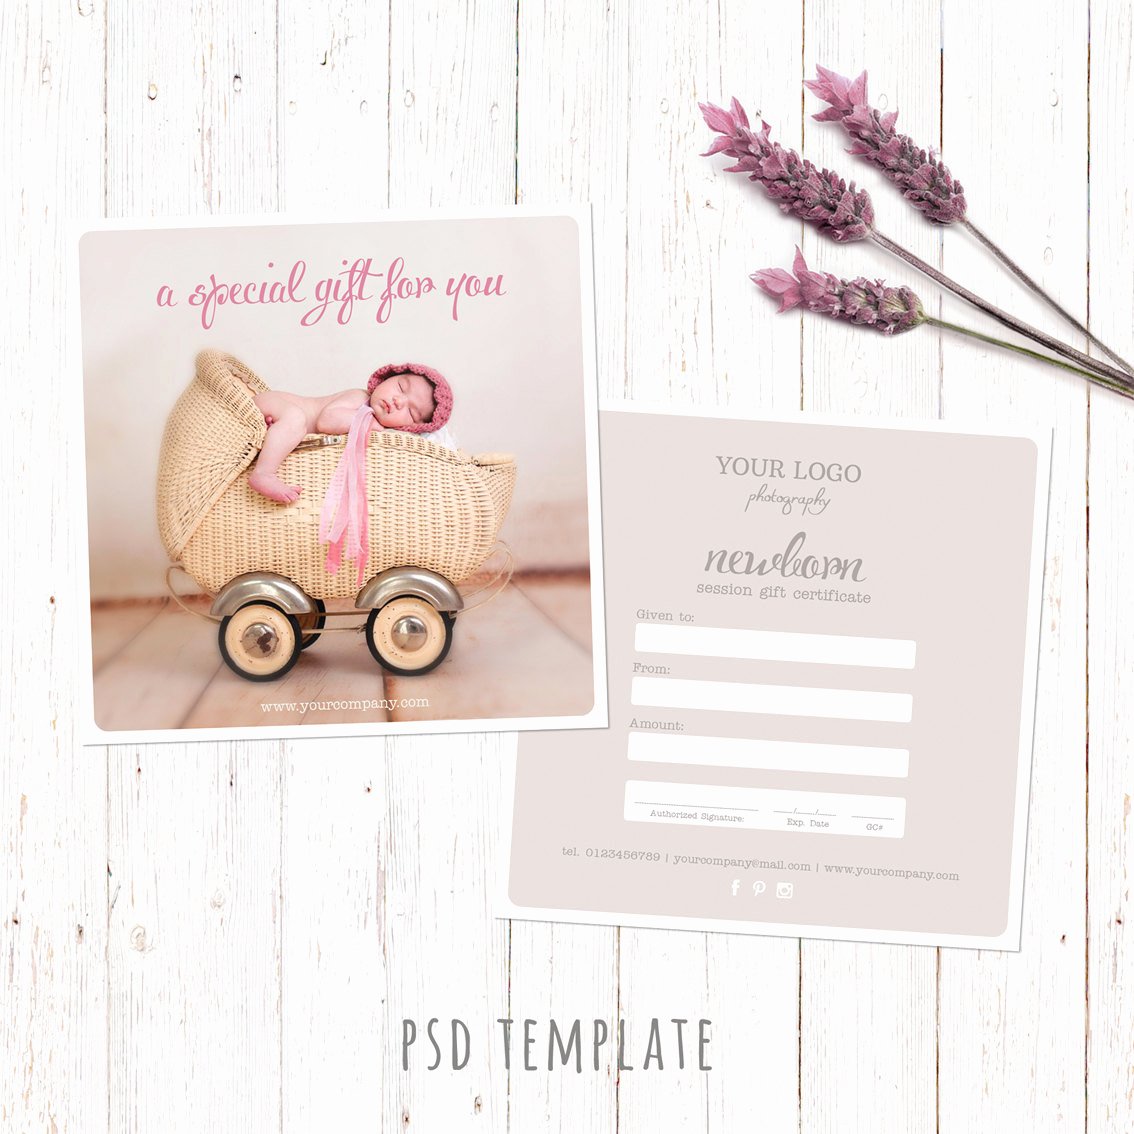 Gift Certificate for Photography Session Best Of Gift Certificate Template Newborn Session Photography T